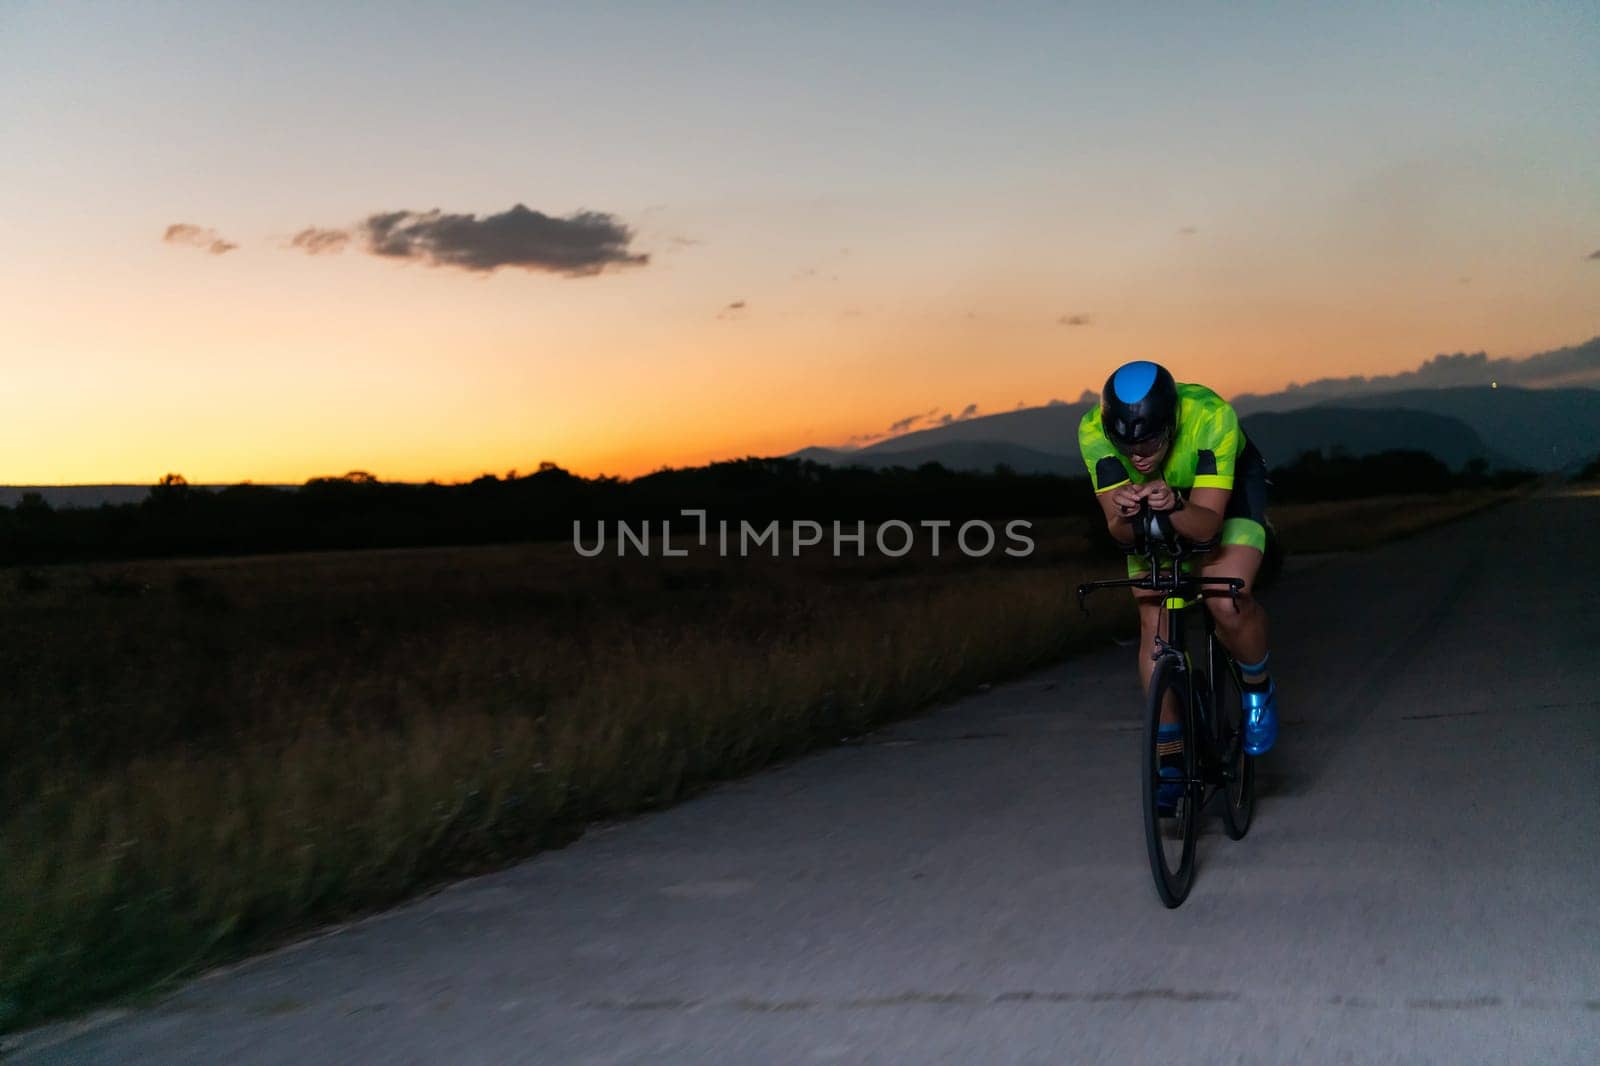 A triathlete rides his bike in the darkness of night, pushing himself to prepare for a marathon. The contrast between the darkness and the light of his bike creates a sense of drama and highlights the athlete's determination and perseverance. by dotshock